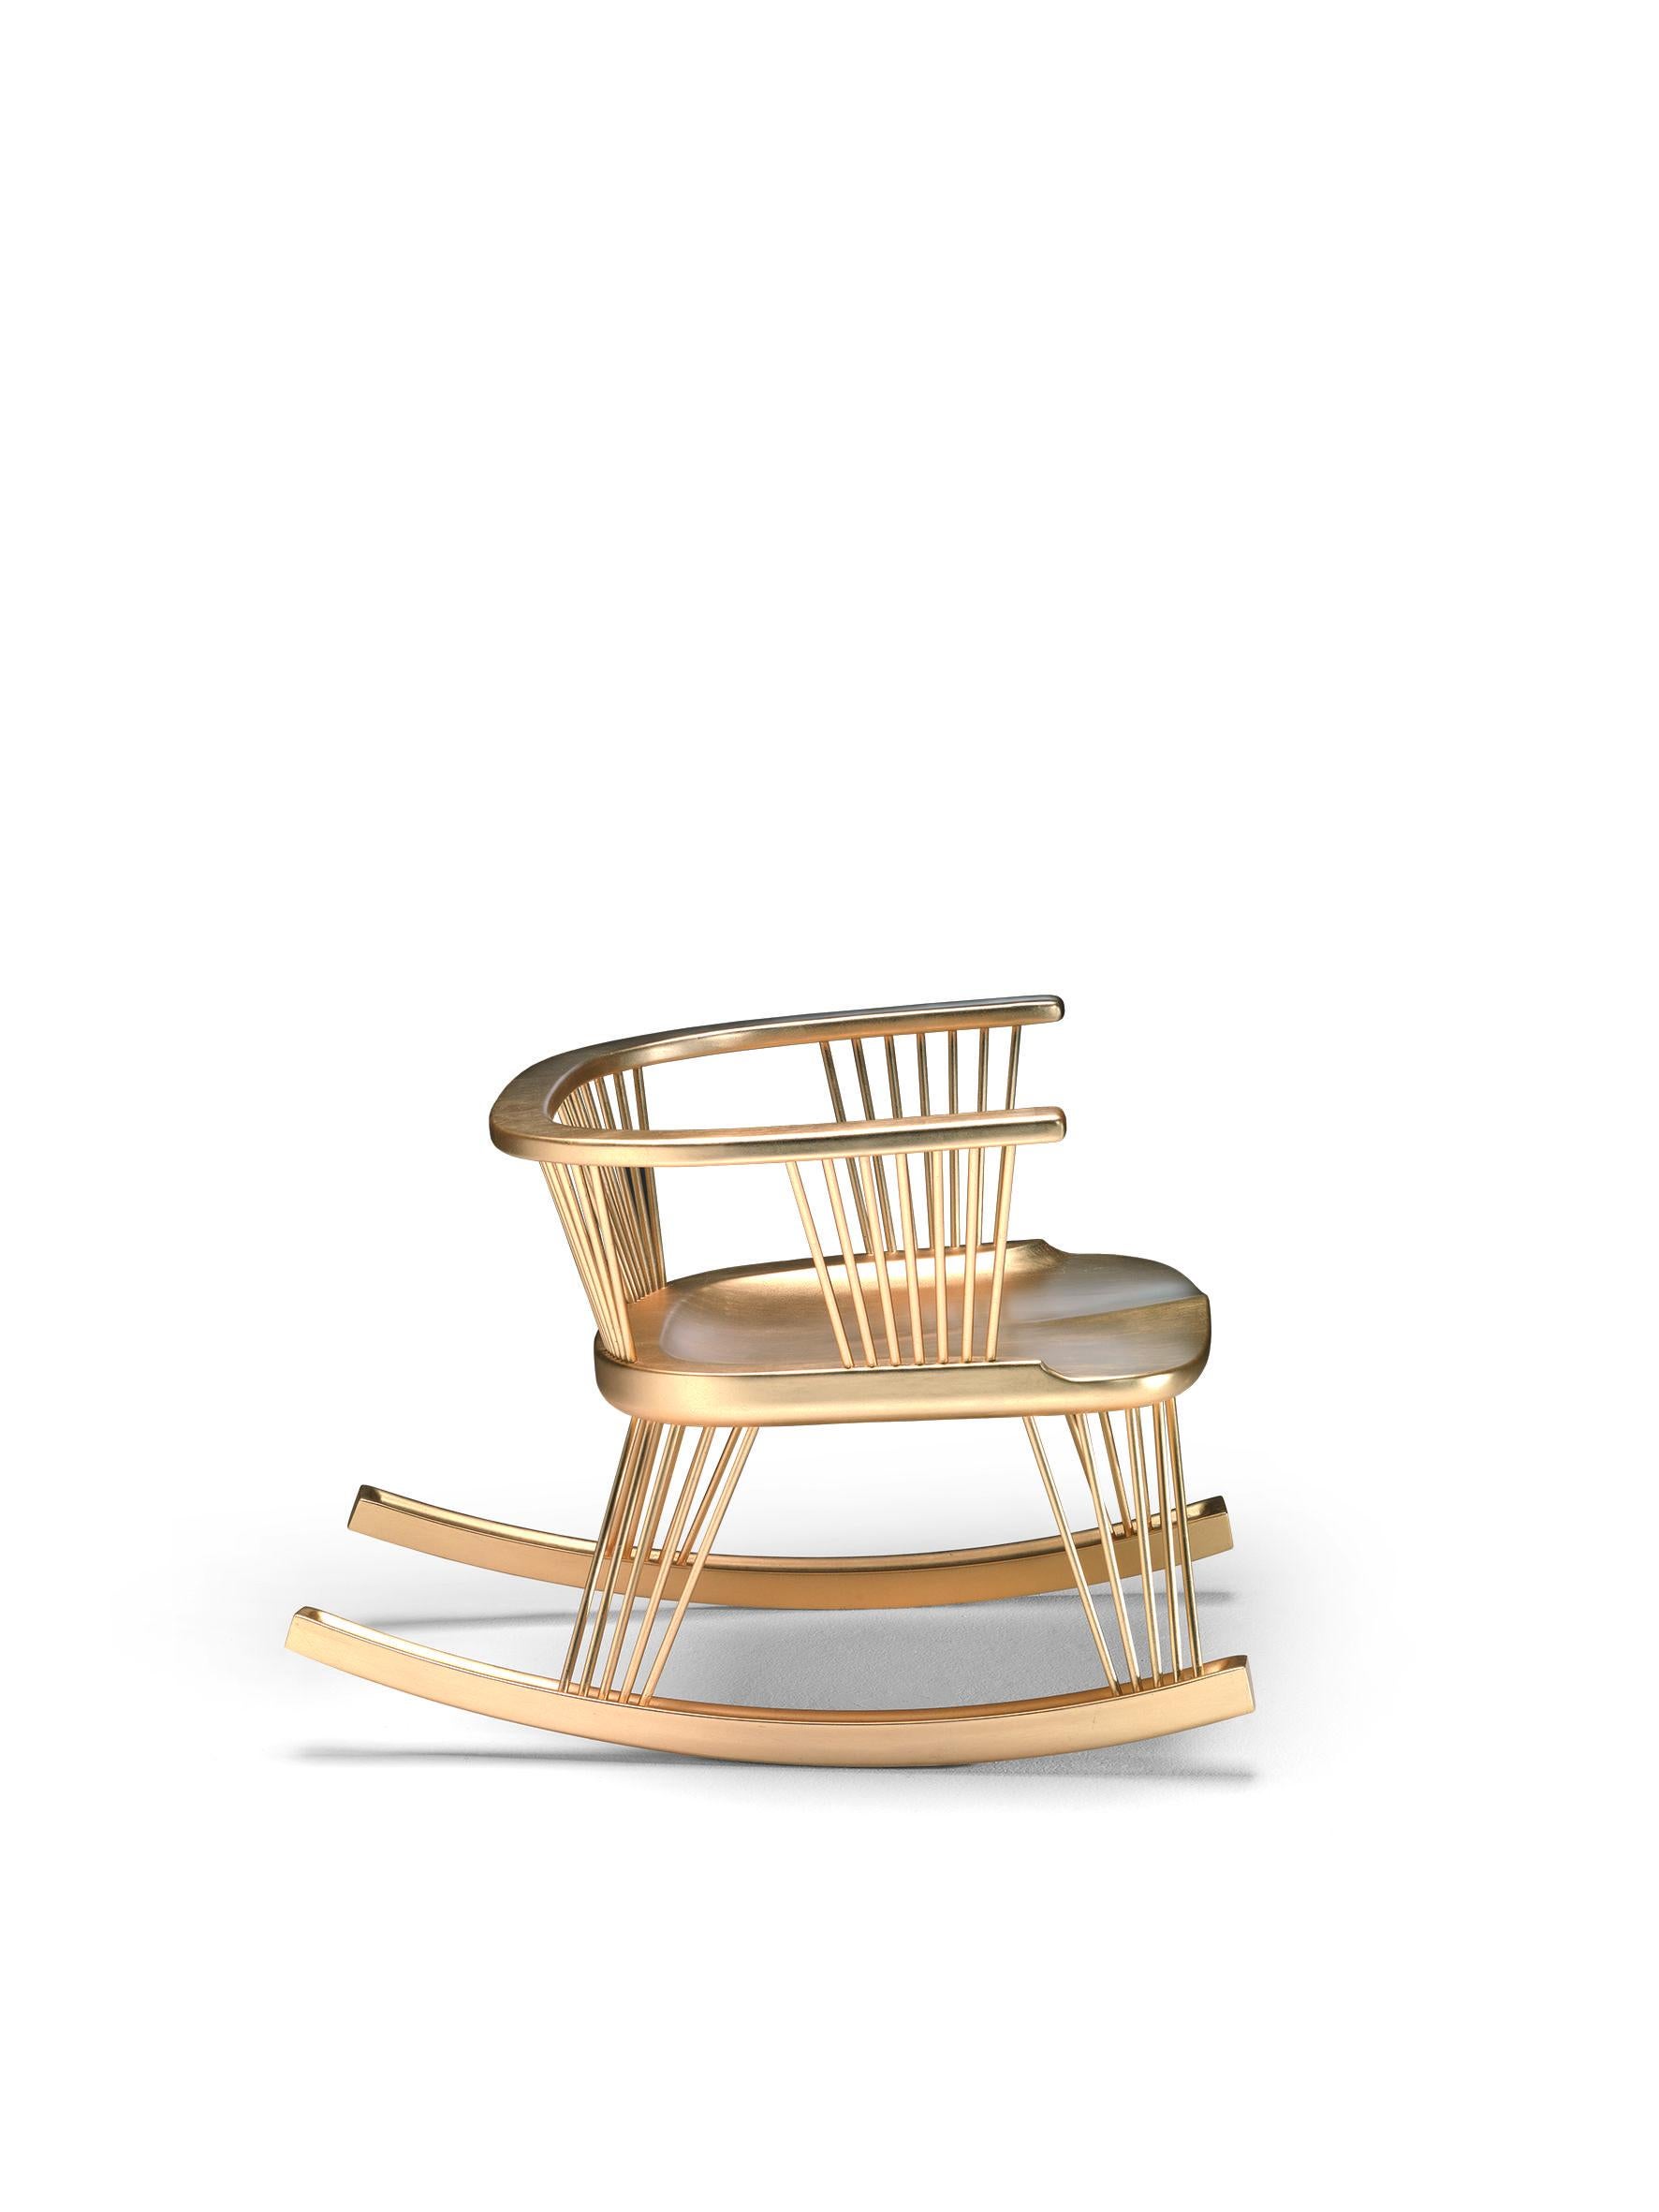 SITLALI Low Rocking Chair in Solid Wood and Thin Overlapping Road and Gold Leaf For Sale 1